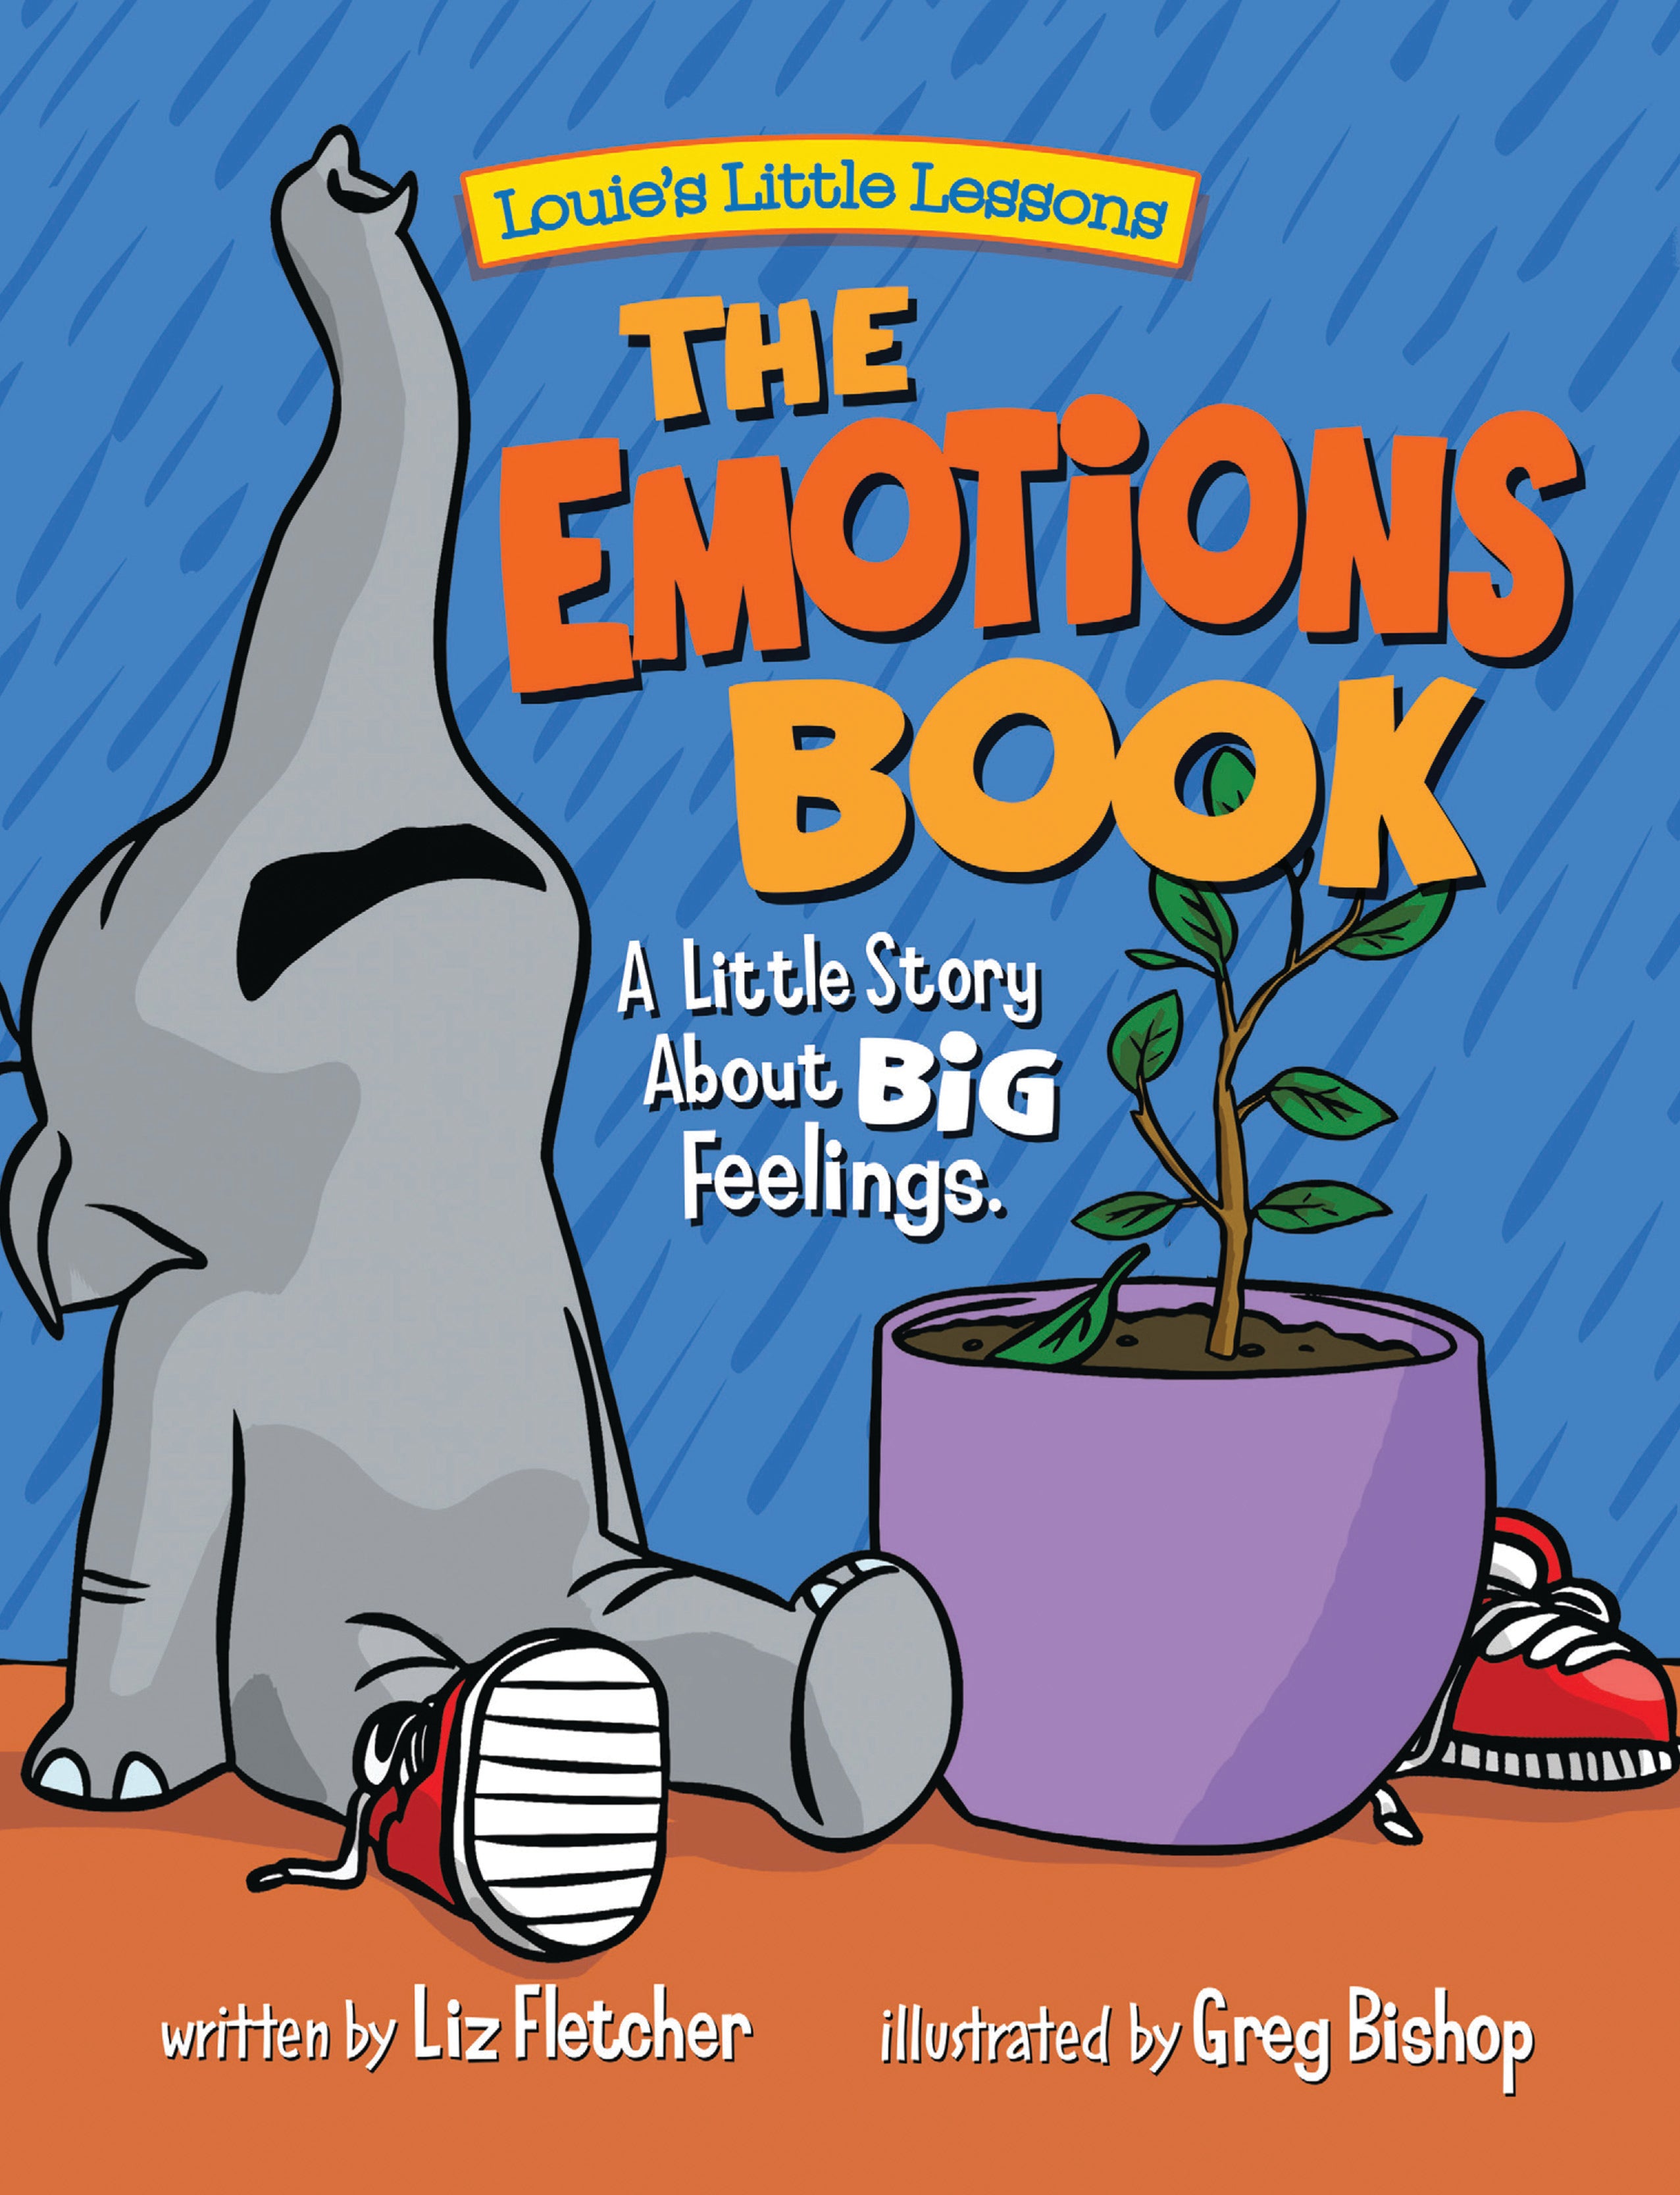 The Big Feelings Book for Children: Mindfulness Moments to Manage Anger, Excitement, Anxiety, and Sadness [Book]